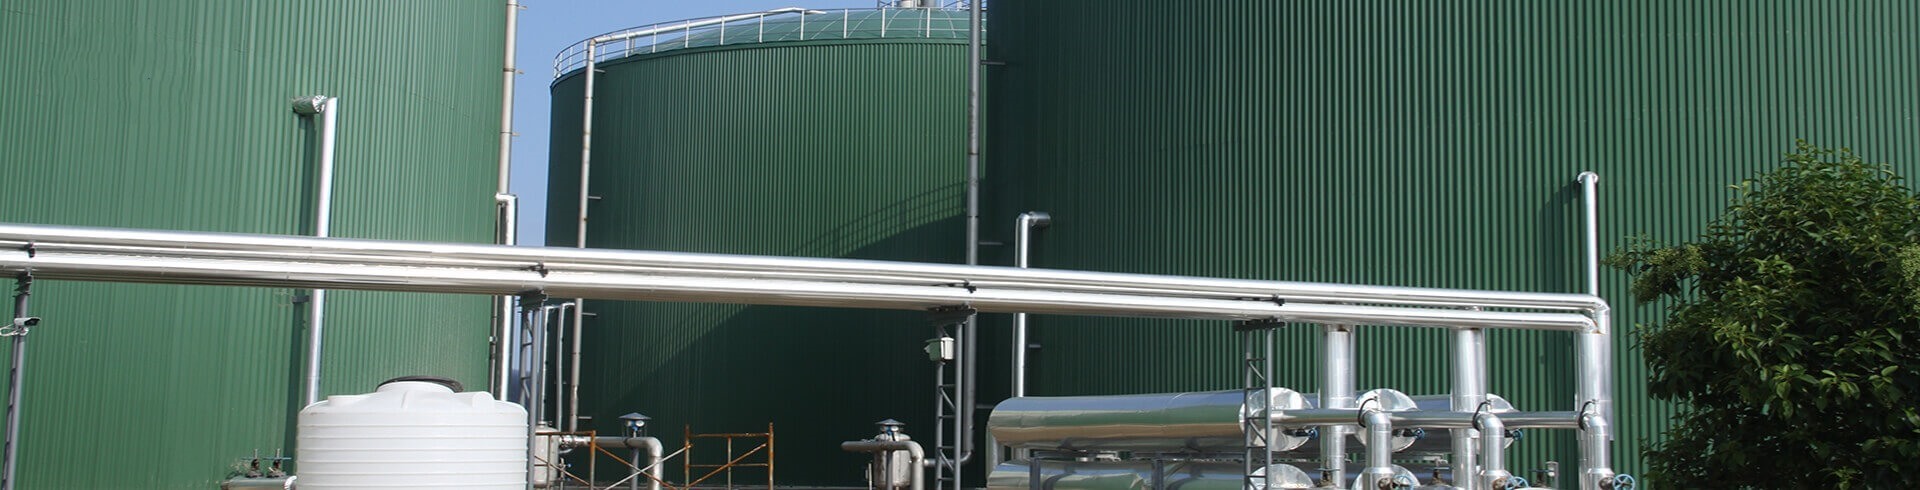 Digester for MAN MWM 1000kW 1MW agricultural biogas power generation & CHP ETTES POWER